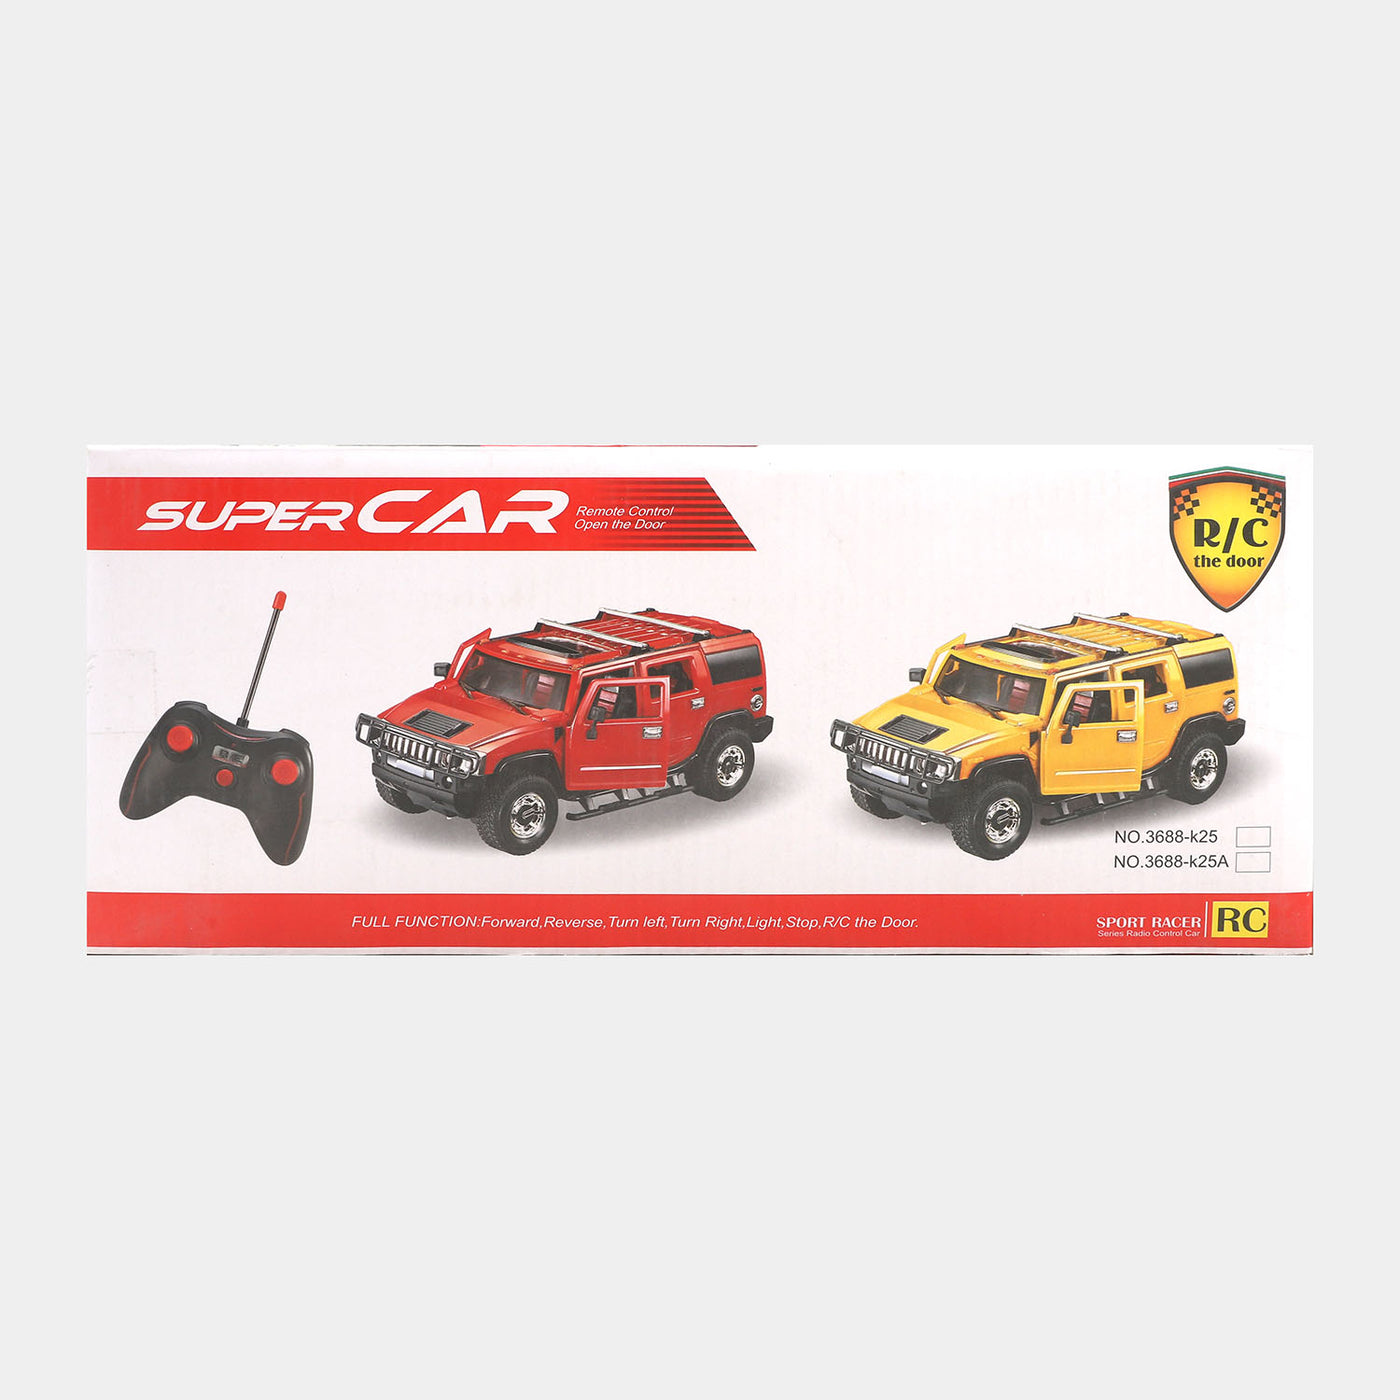 Sports Racer Remote Control Car Toy For Kids